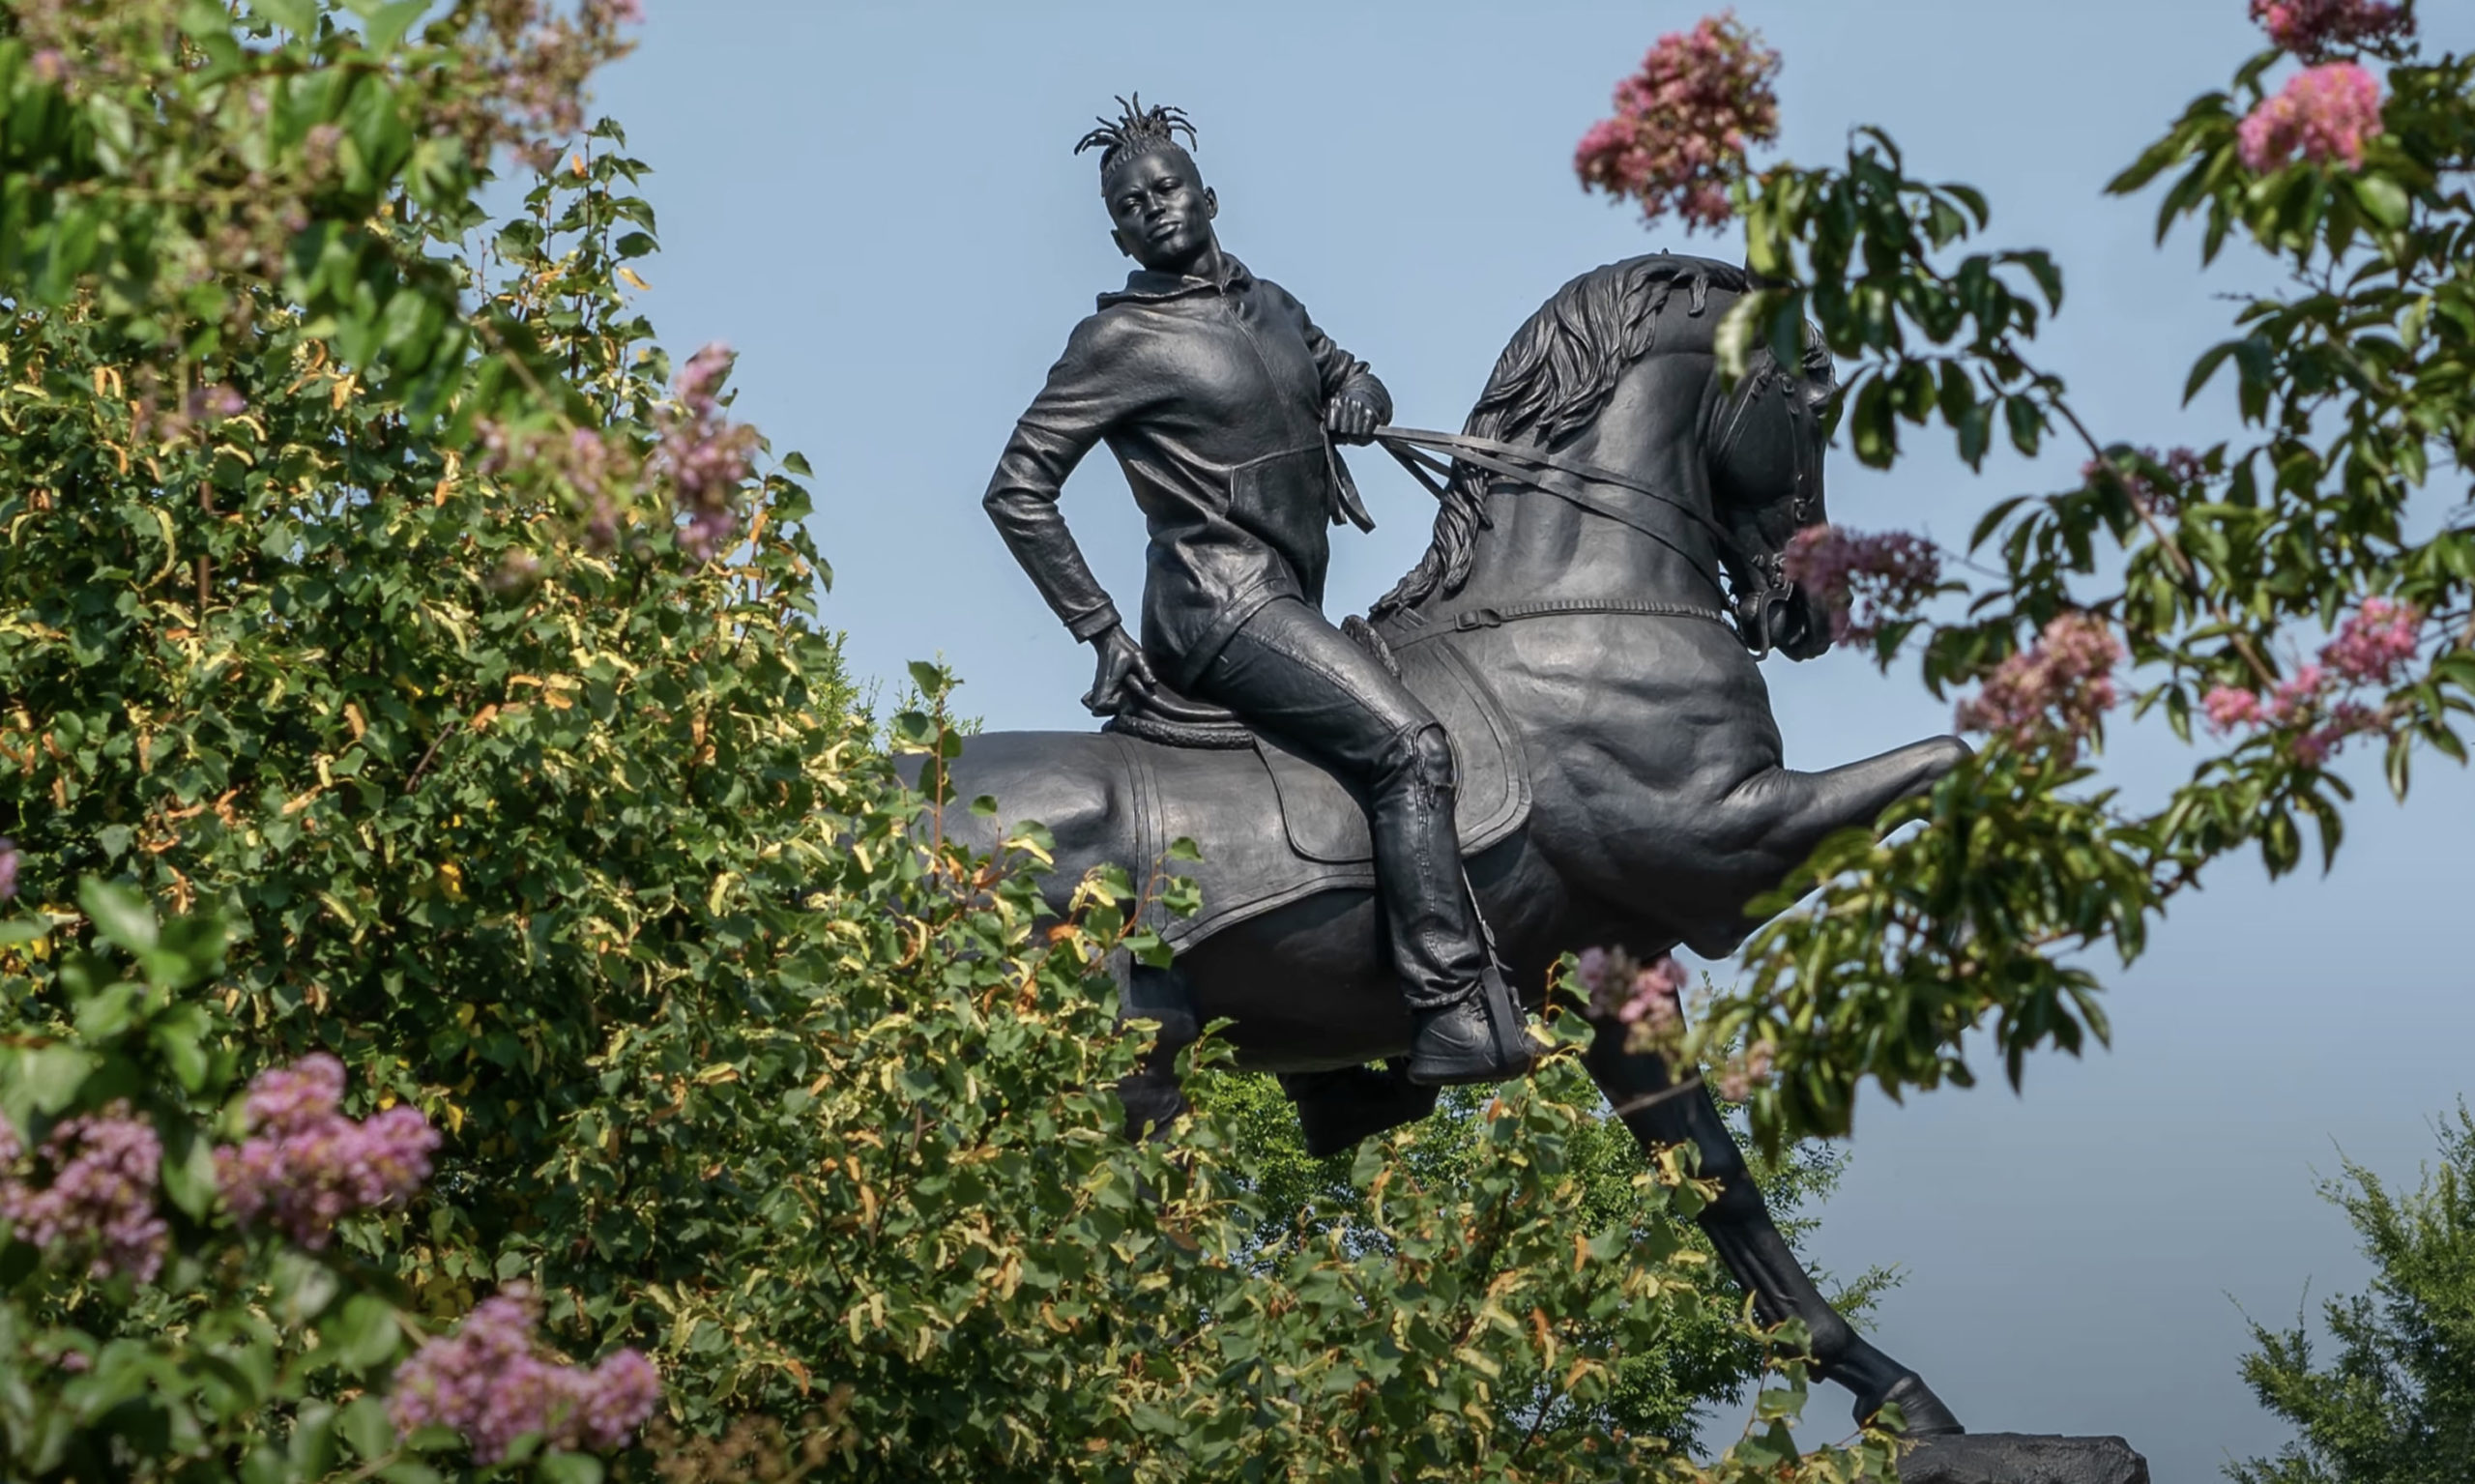 Kehinde Wiley, Rumors of War, 2019, patinated bronze with stone pedestal, overall: 27’4 7/8” x 25’5 7/8” x 15’9” 5/8” (Virginia Museum of Fine Arts) © Kehinde Wiley